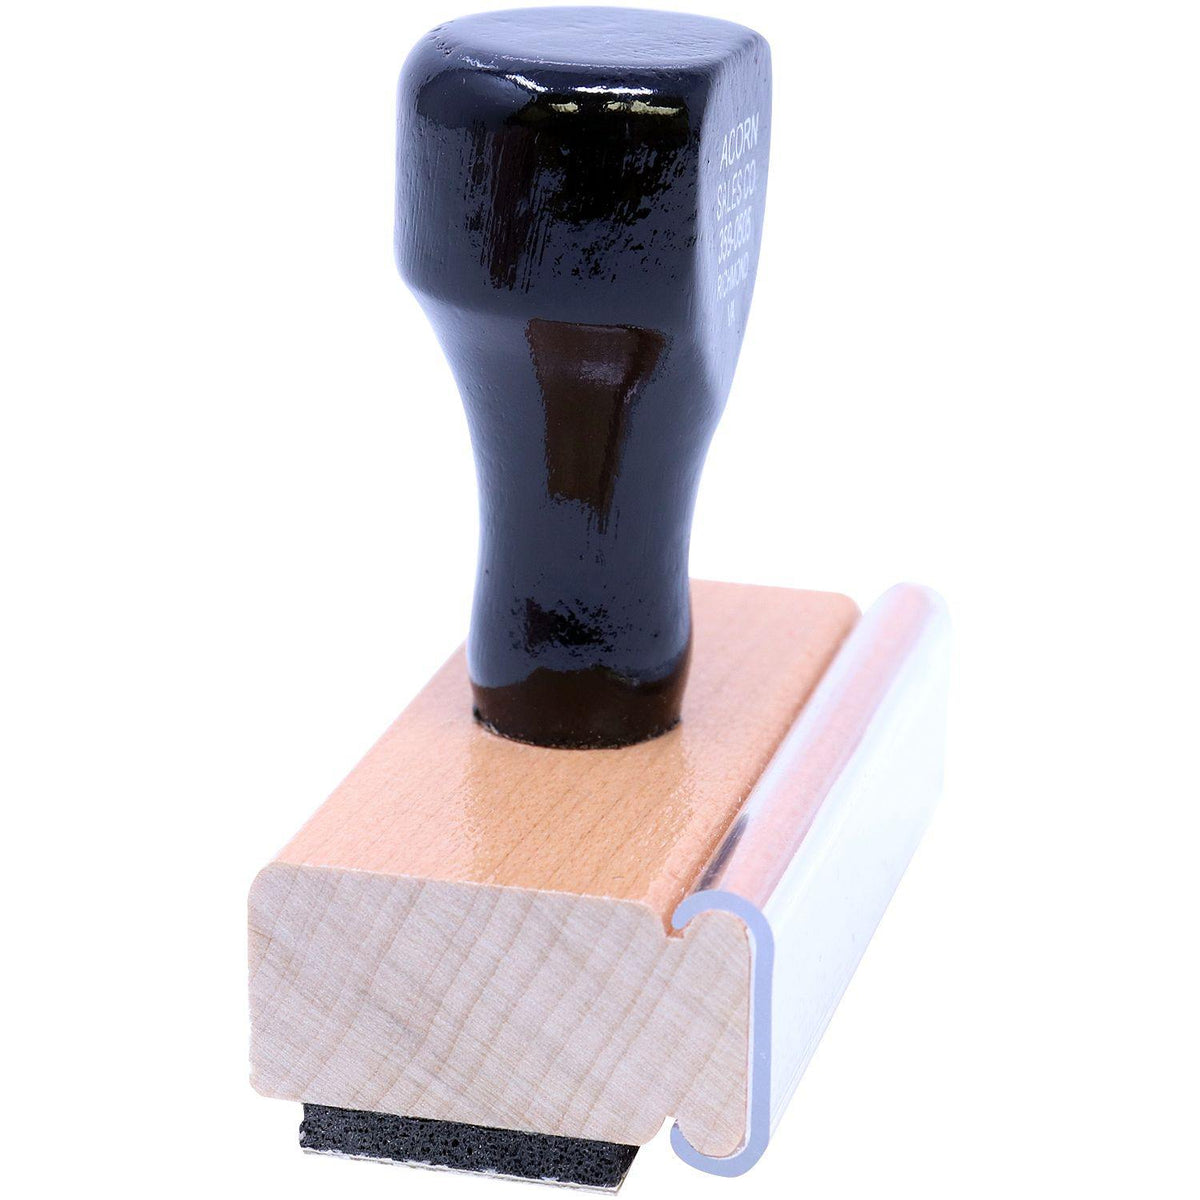 Side View of Essential Job Rubber Stamp at an Angle